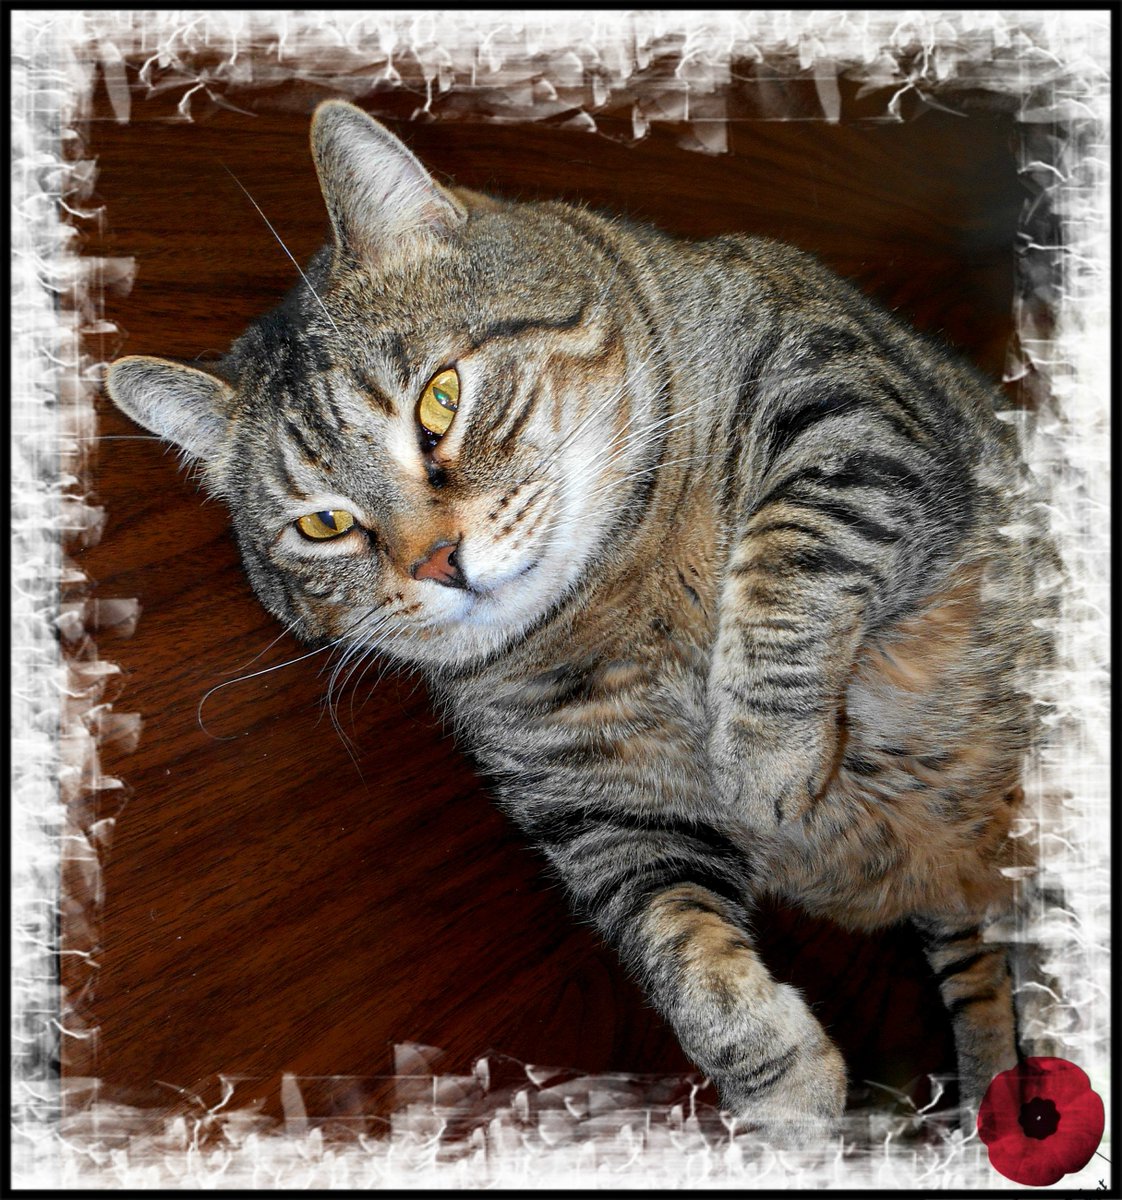 #GoodMorning and #HappyRemembranceDay from Marty! Thank you to all the veterans who are serving or have served our country 💞 #LestWeForget 💞